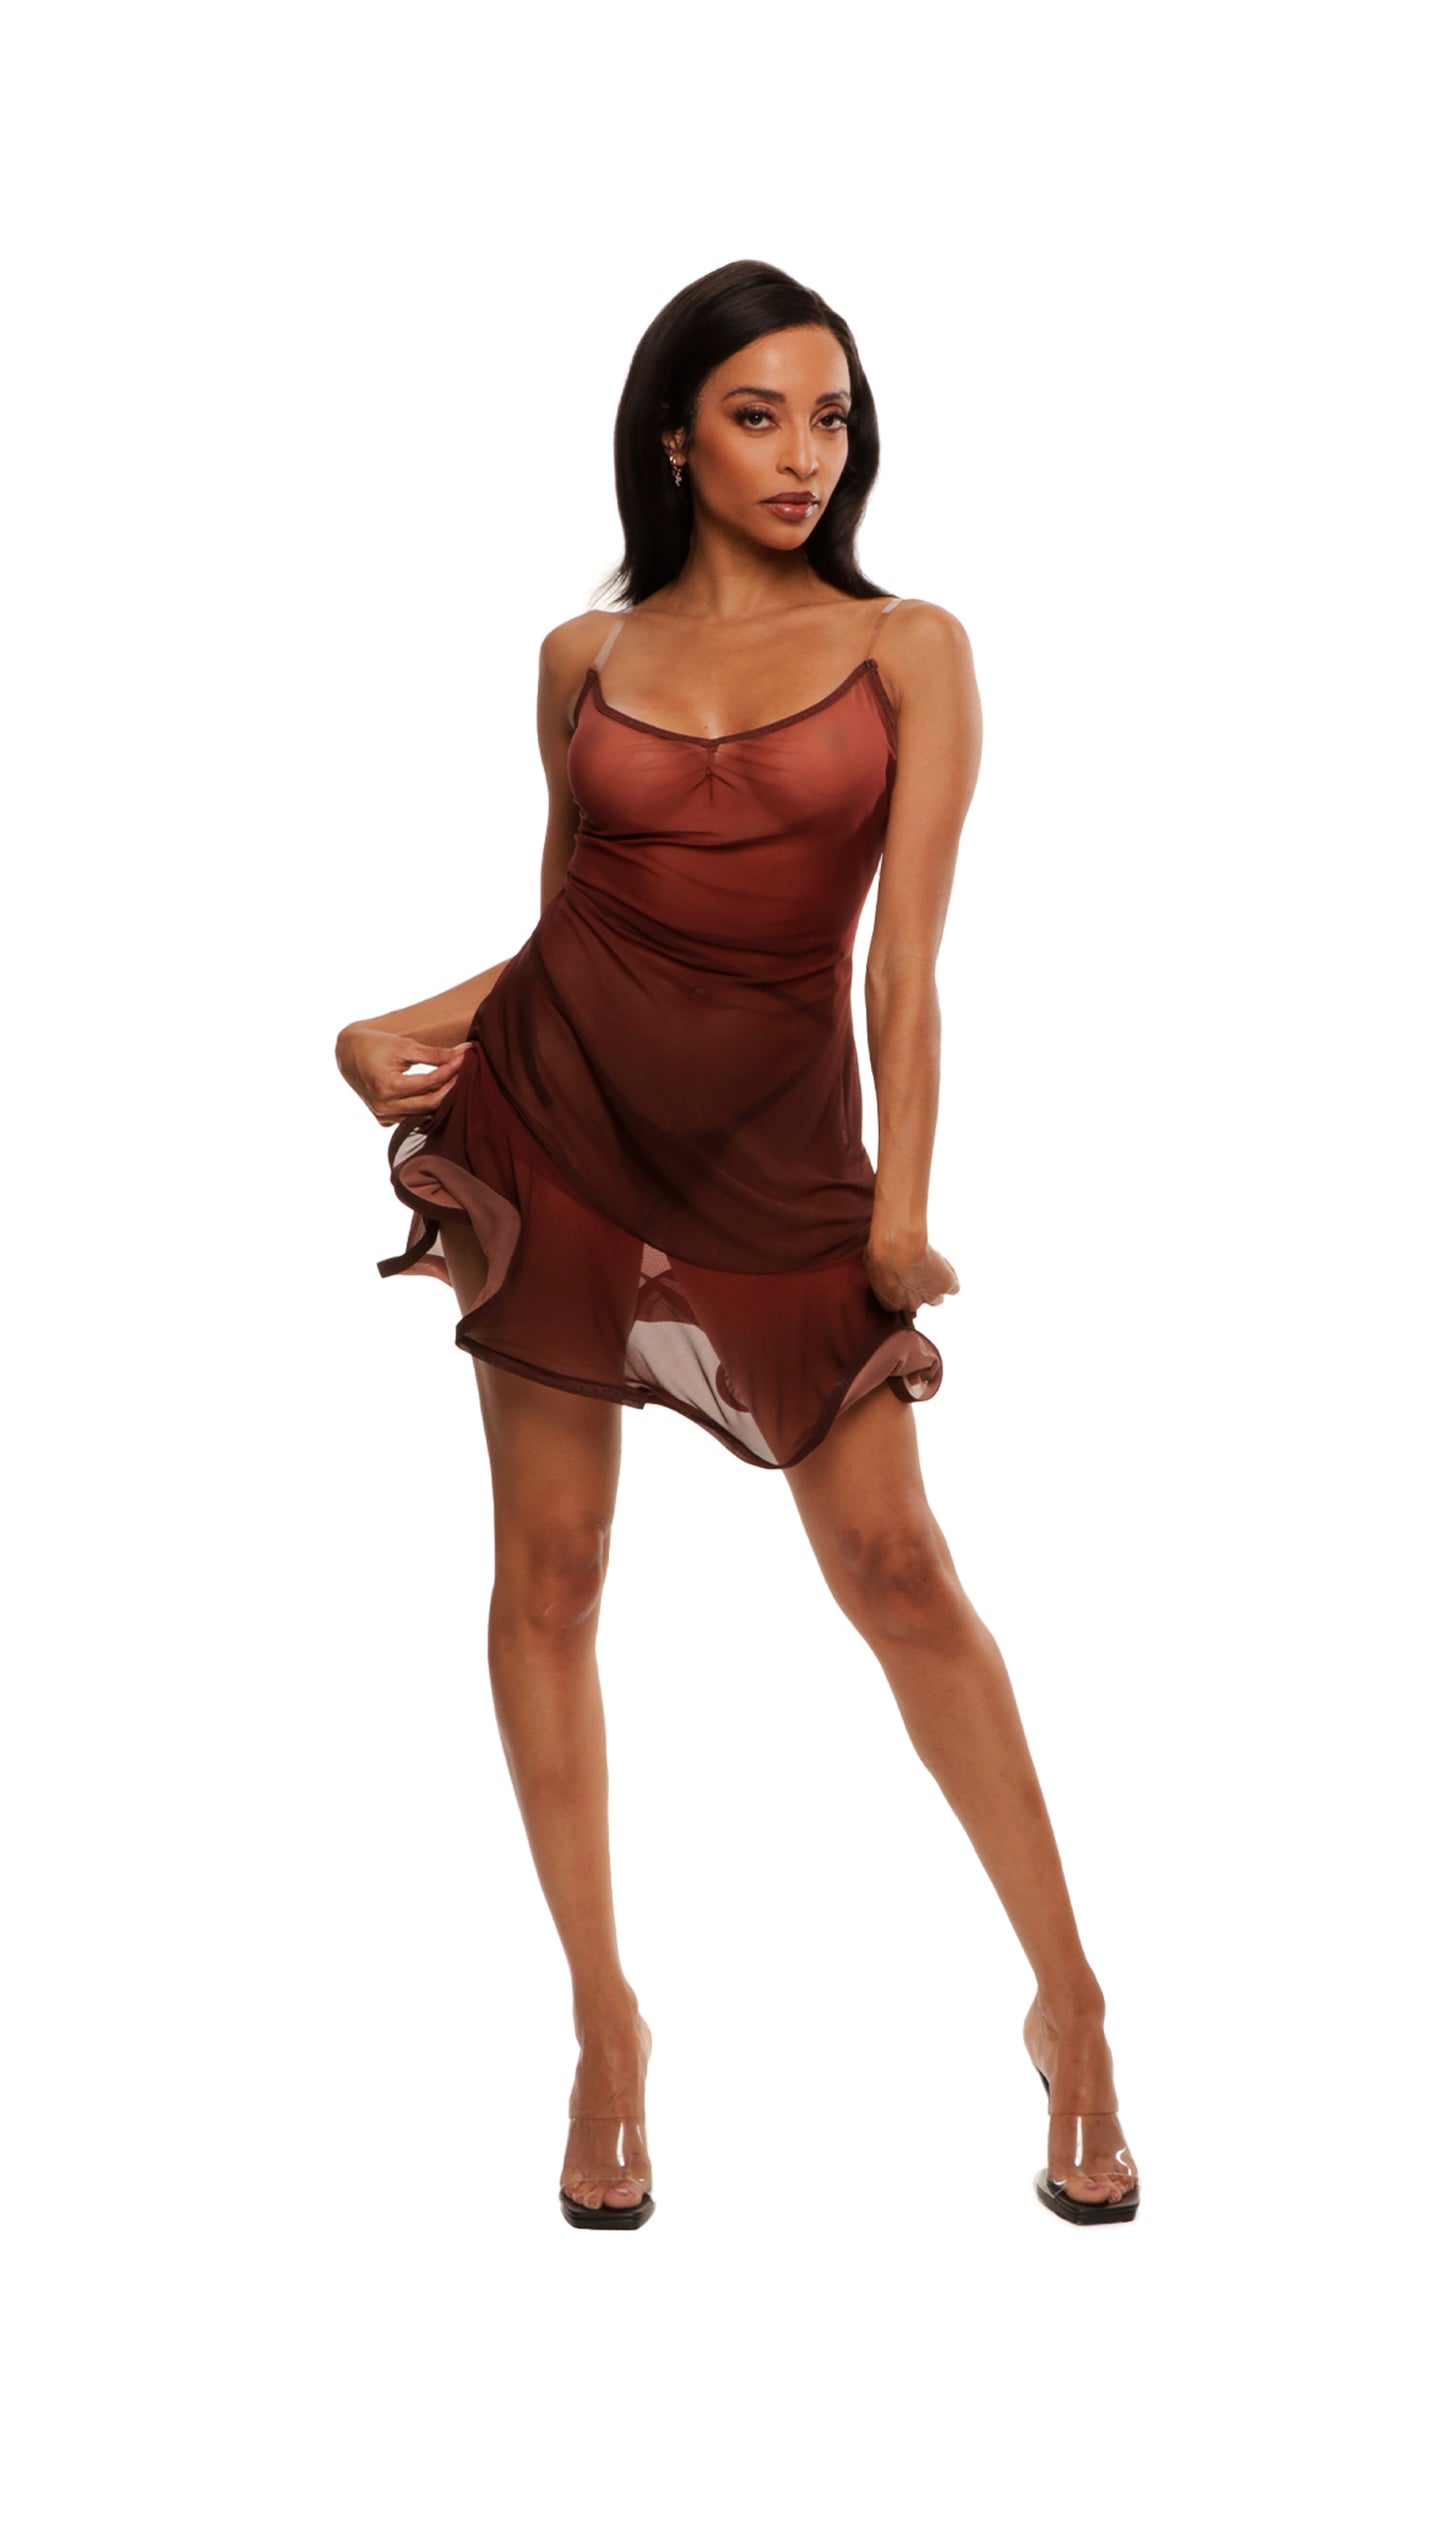 Woman who looks like Beyoncé or Aaliyah wears a stretch sheer gradient printed mesh dress with flirty ruffle hemline. Front view.